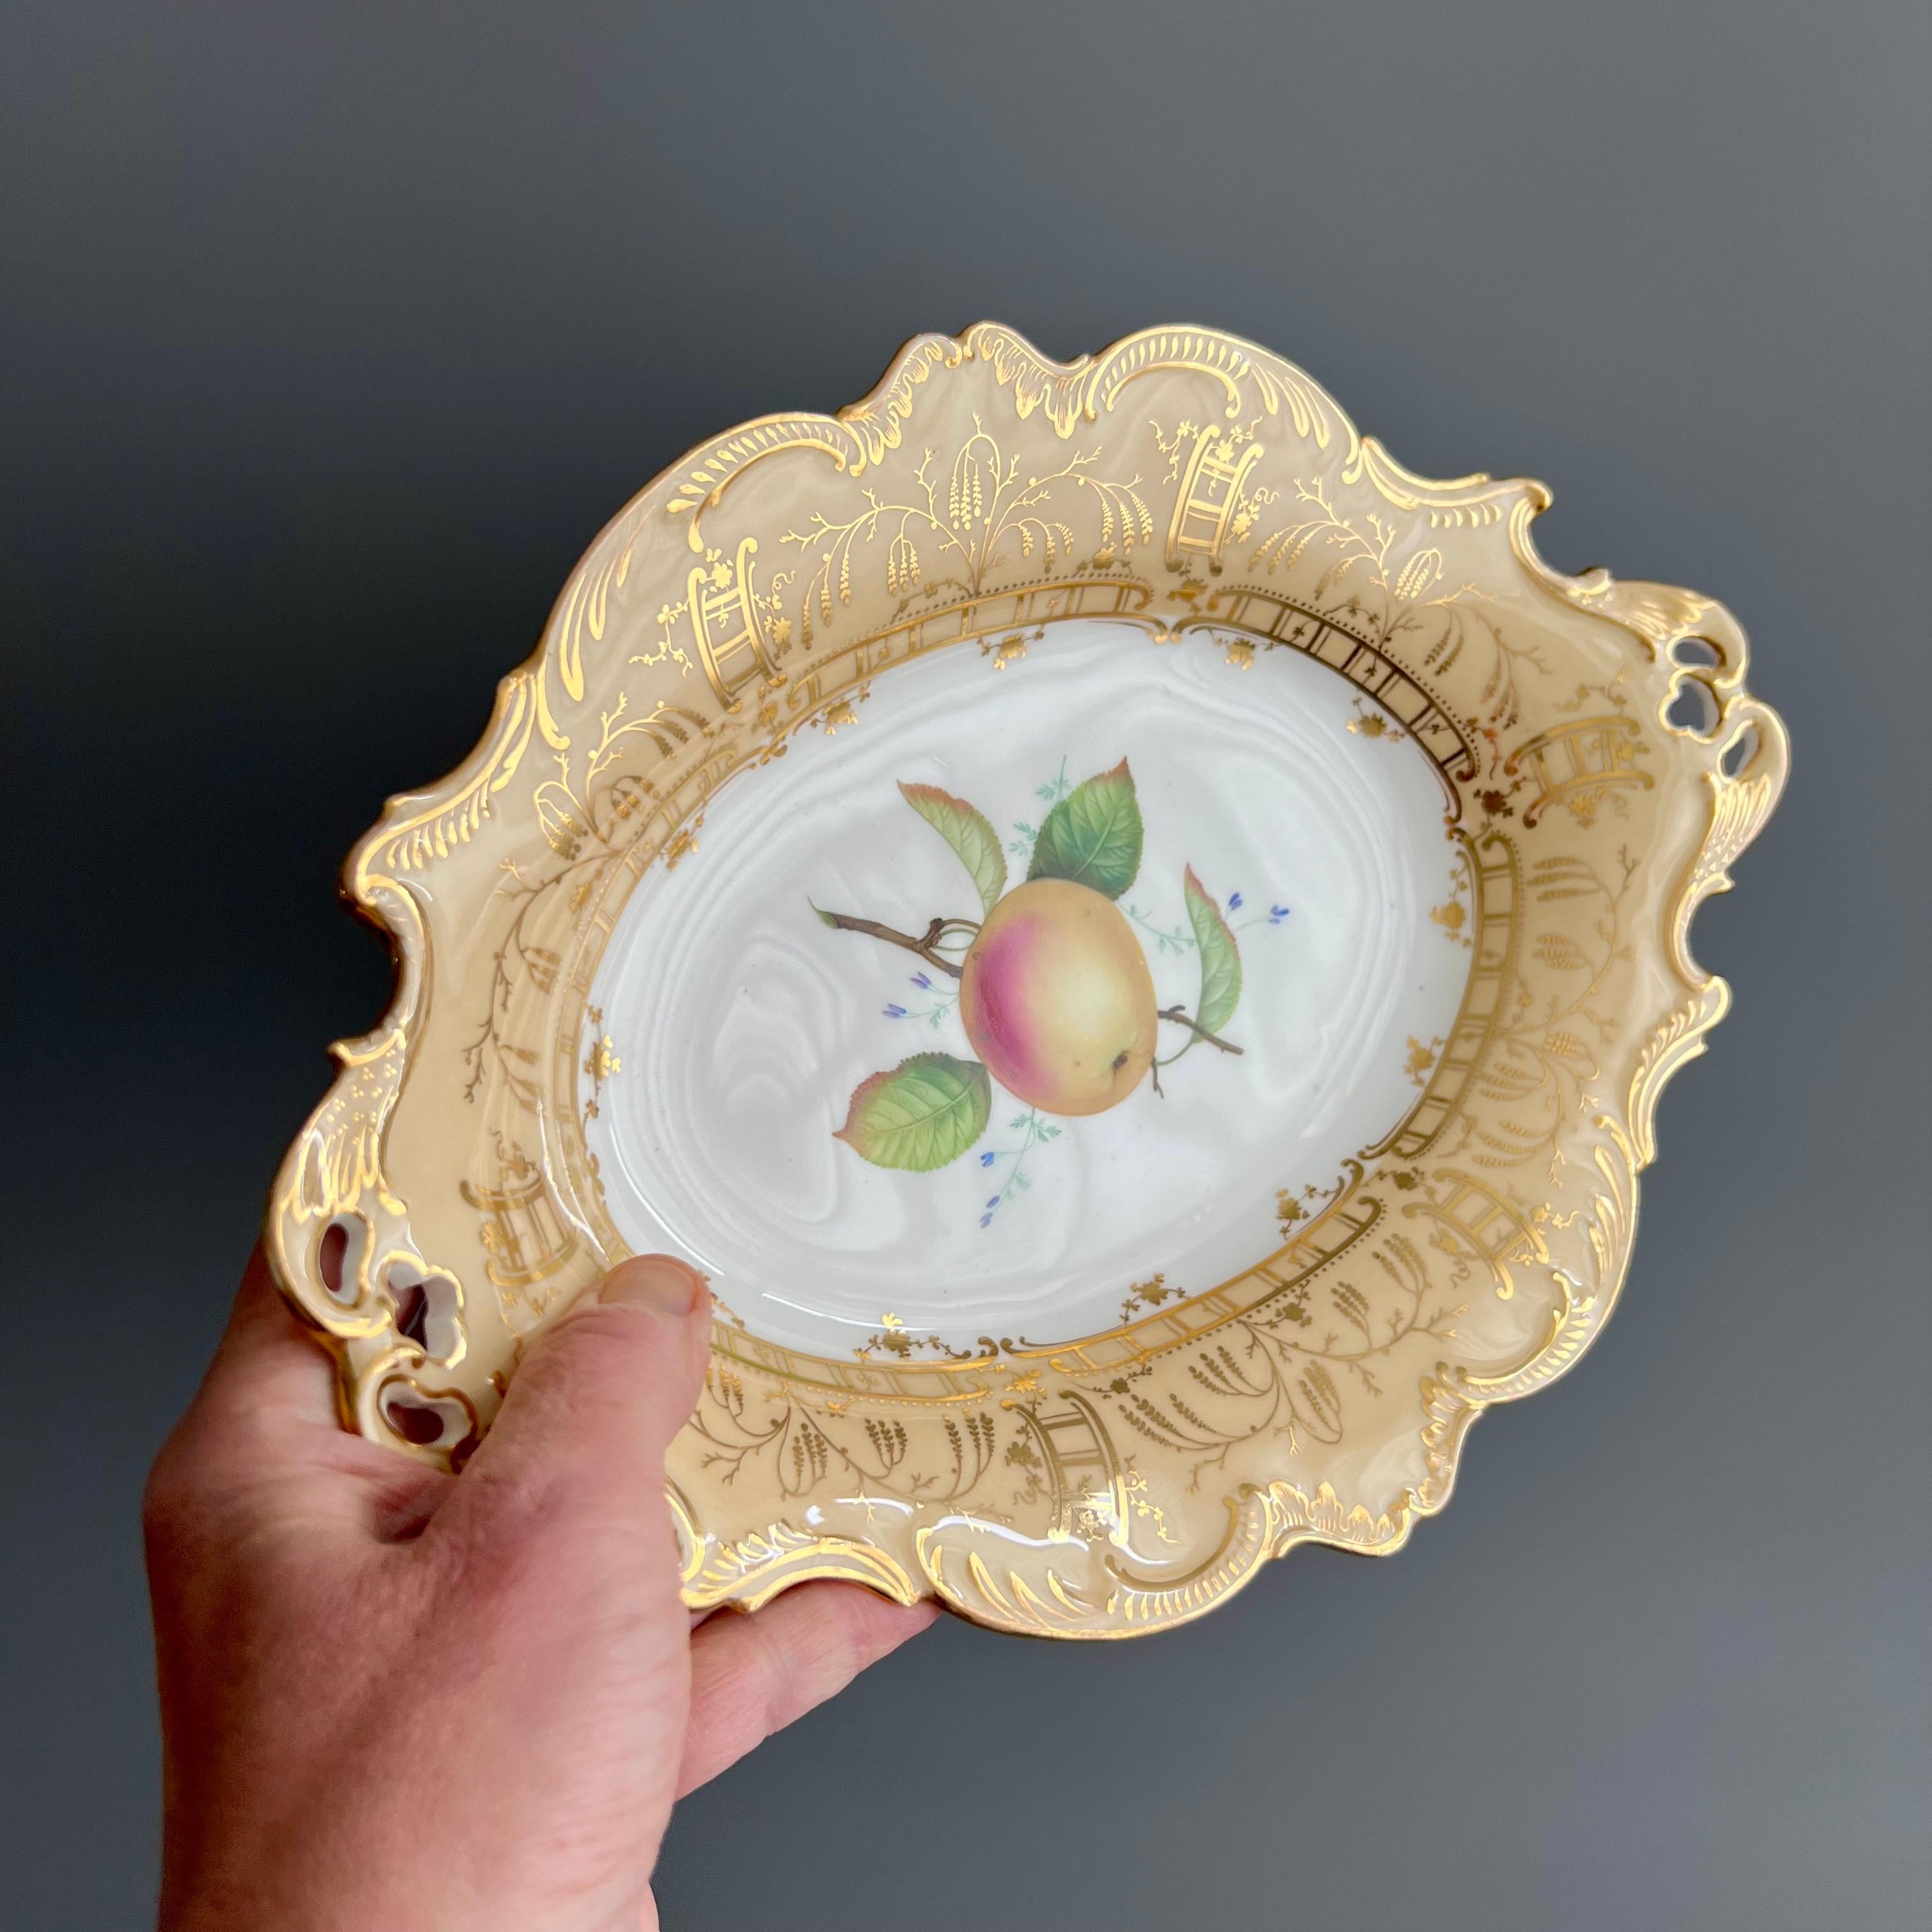 This is a stunning oval dessert dish made by Coalport in about 1847. The dish has a pierced rim, a beige and finely gilded ground and a beautifully hand painted apple painted by the famous painter Joseph Birbeck.

Coalport was one of the leading